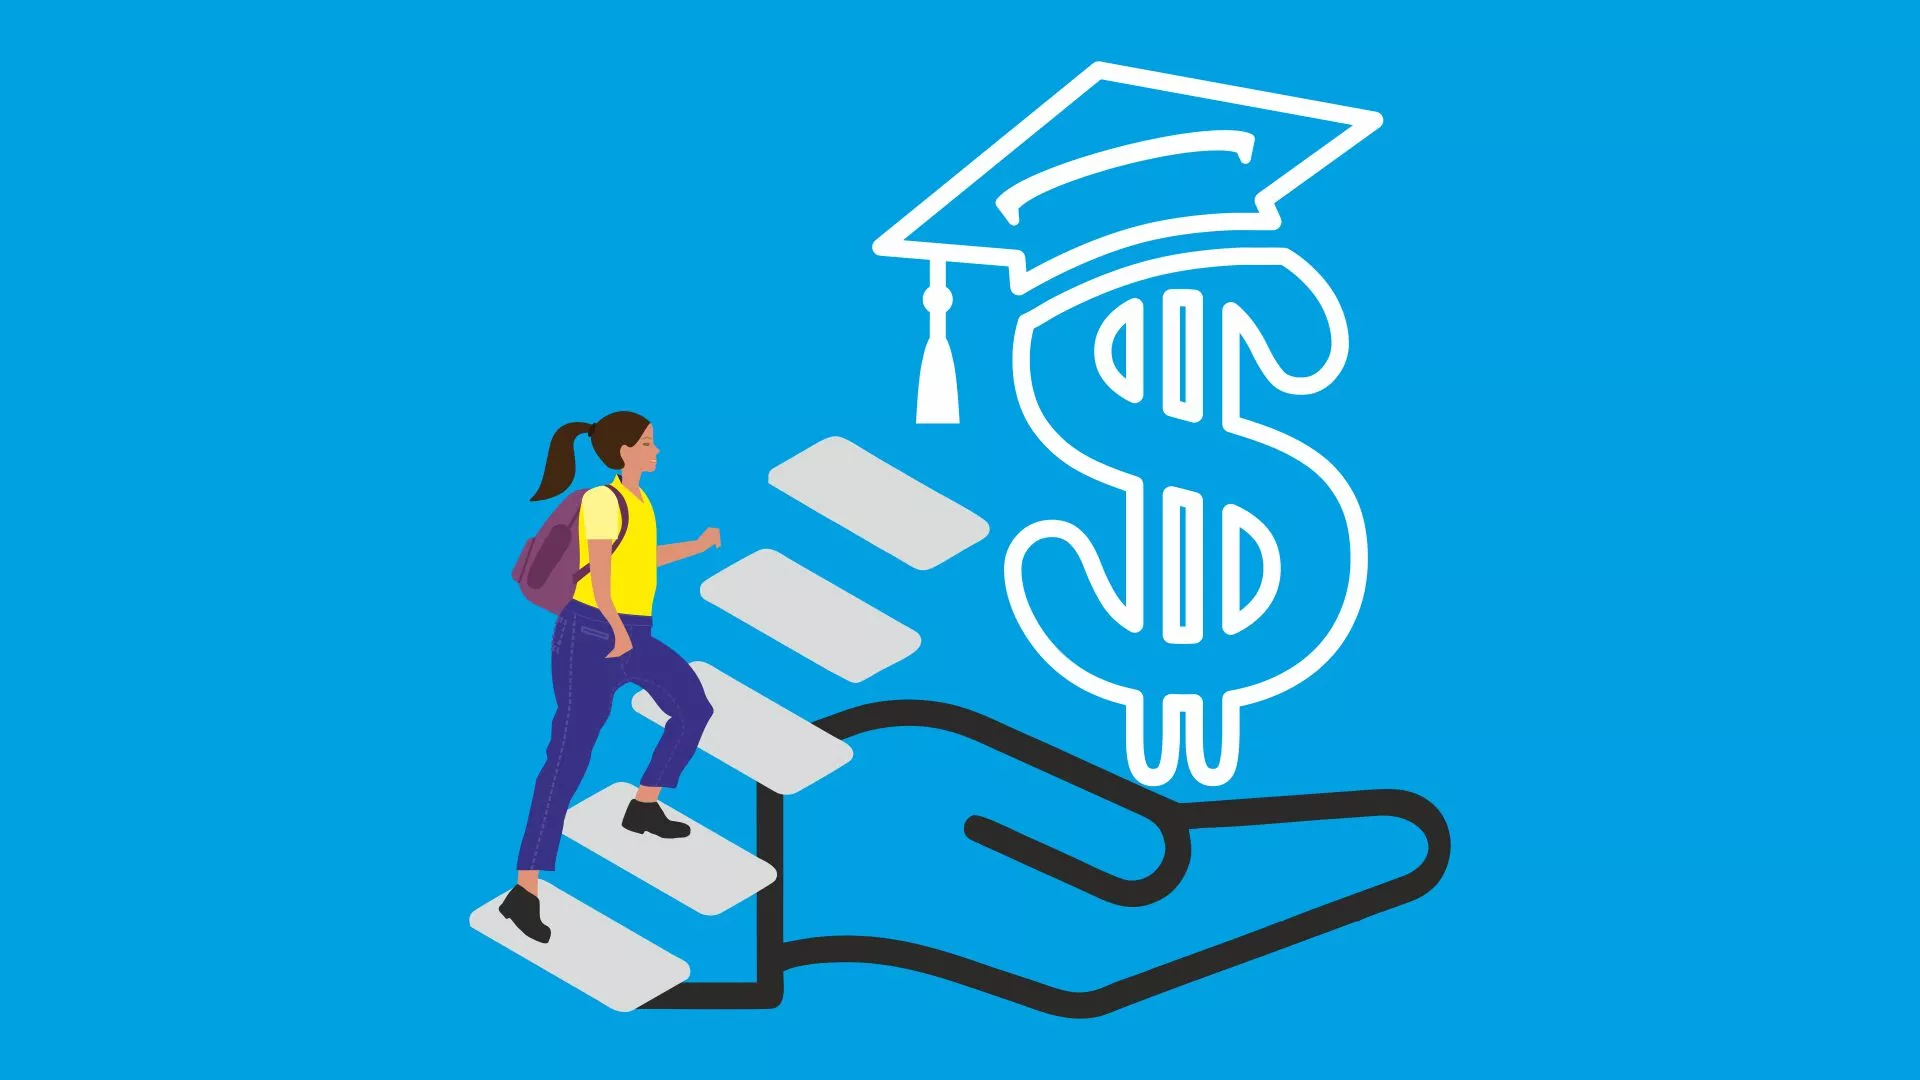 Making Higher Education Affordable